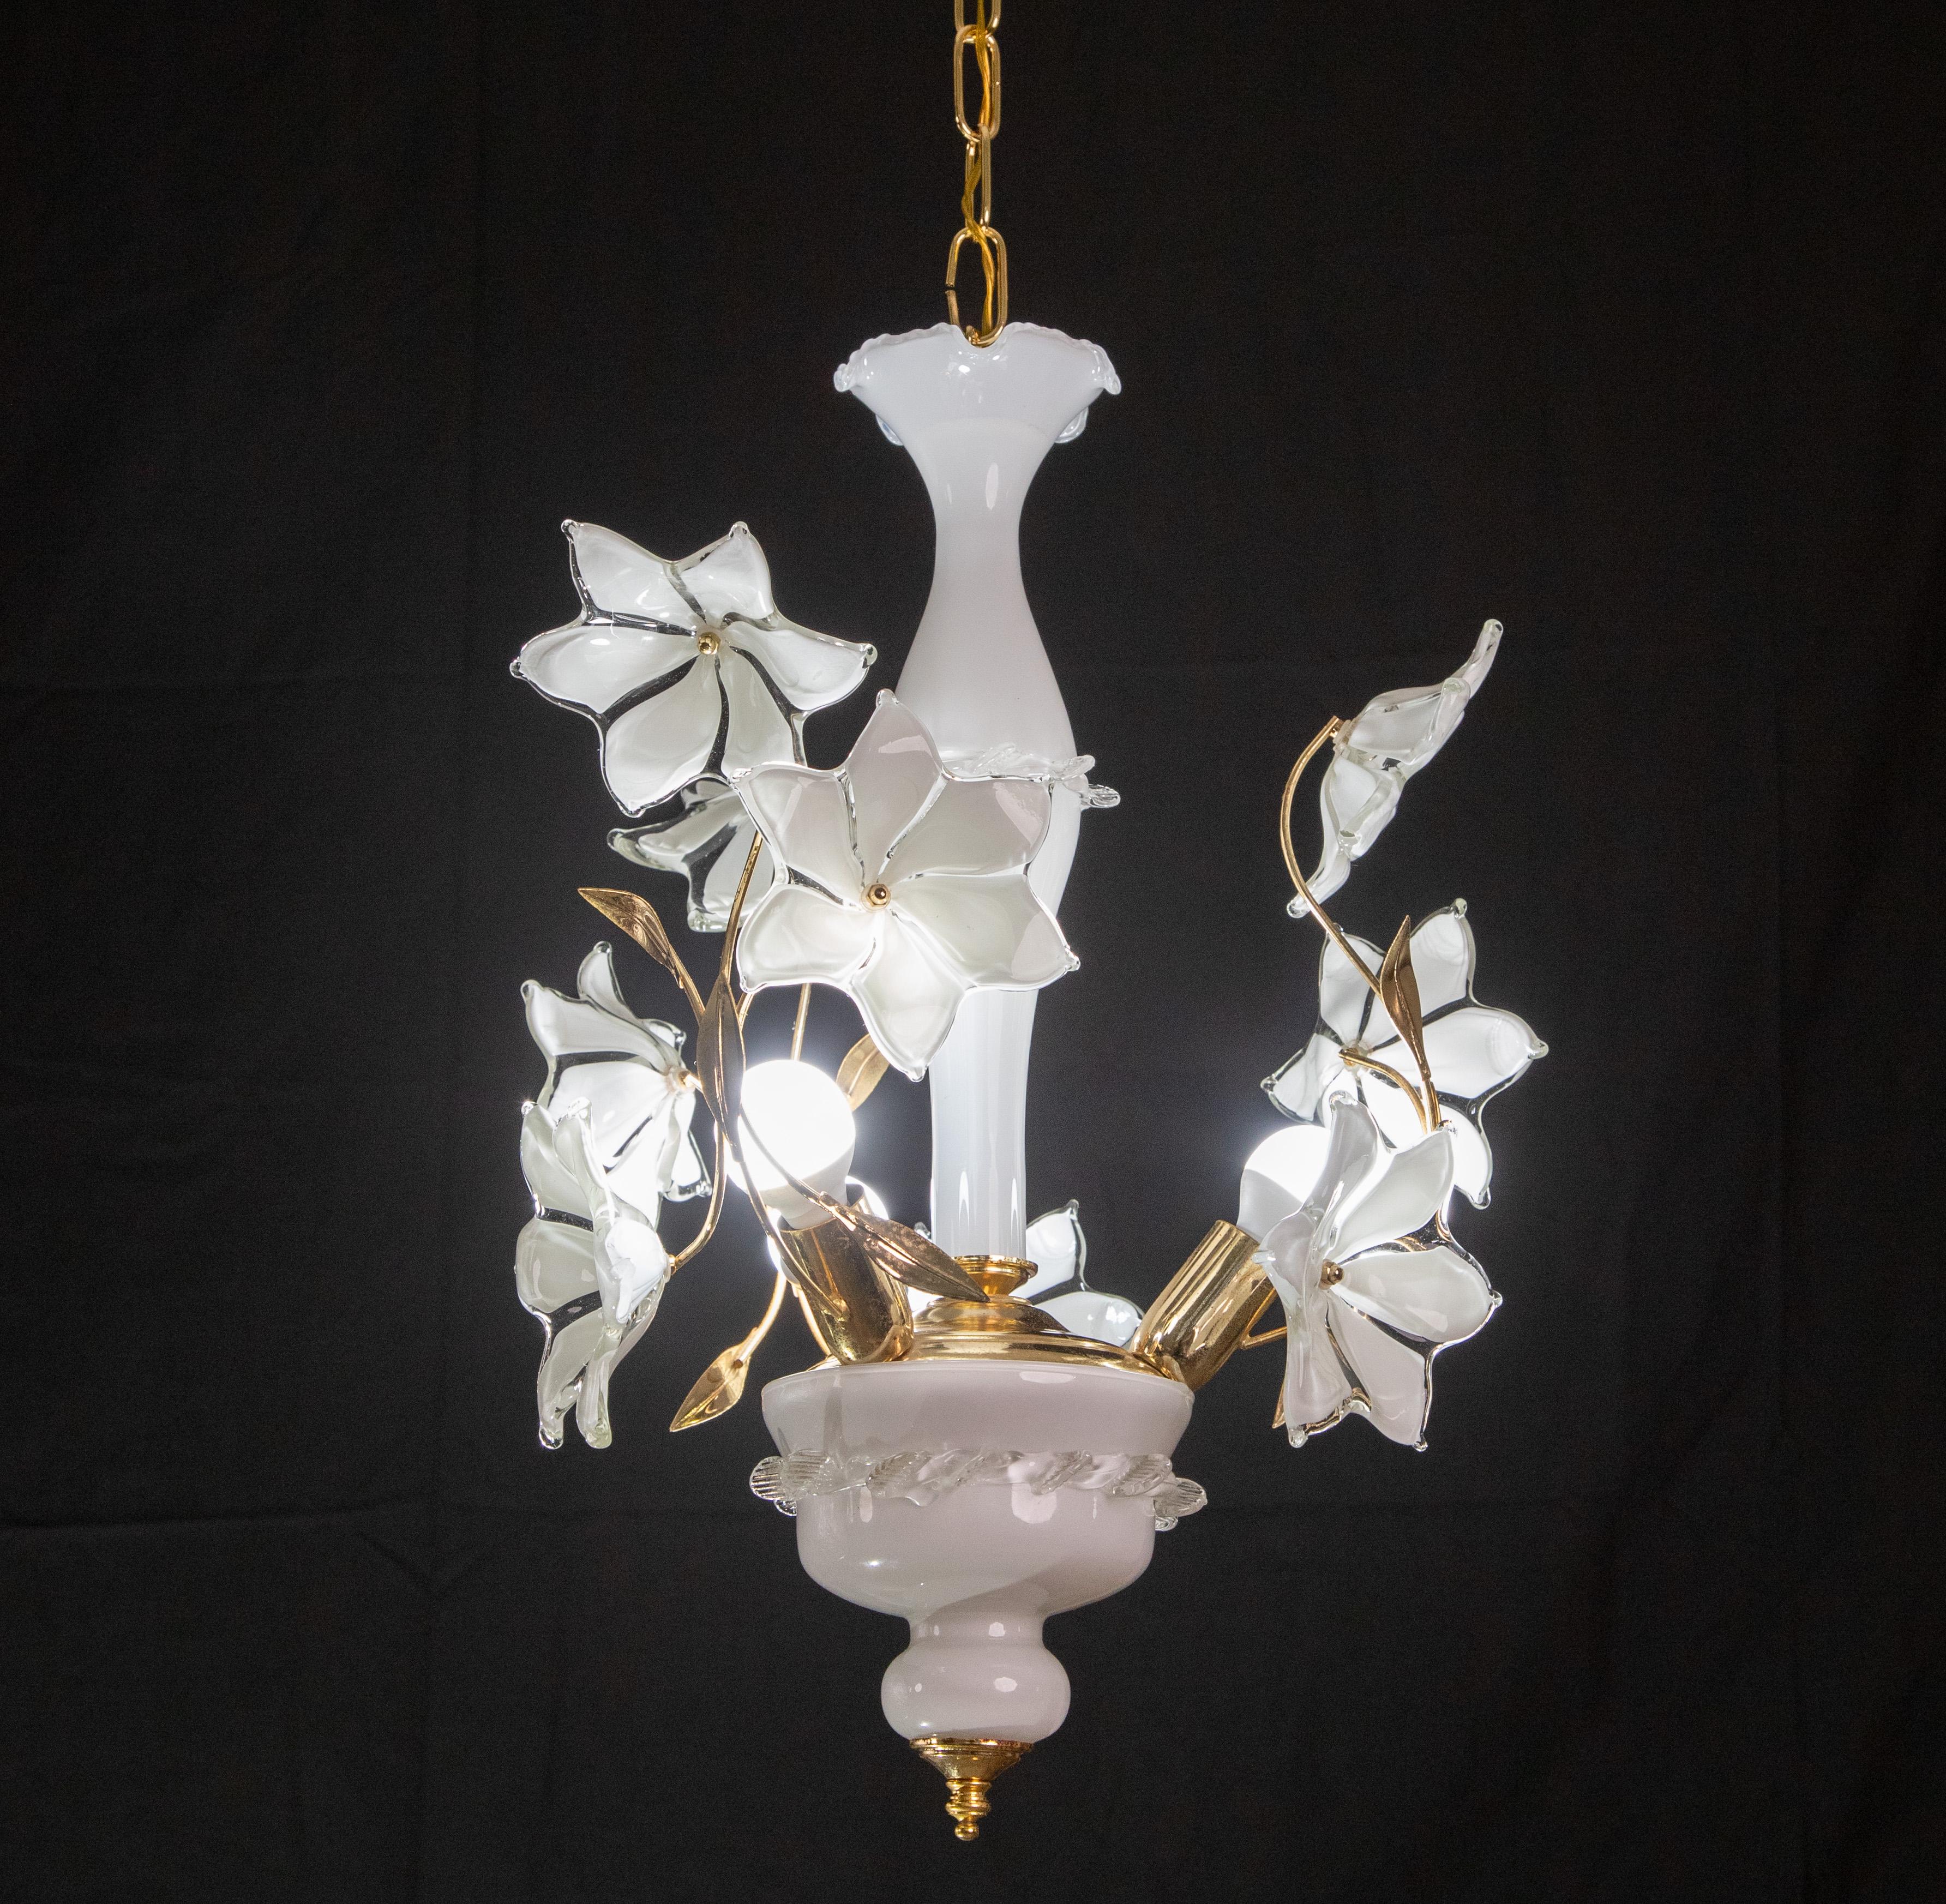 Vintage Murano glass chandelier with white flowers.
Gold bath frame, excellent vintage condition
The chandelier has 3 light points with E14 socket.
The height of the chandelier is 105 cm with chain, 60 cm without chain, the width of the chandelier